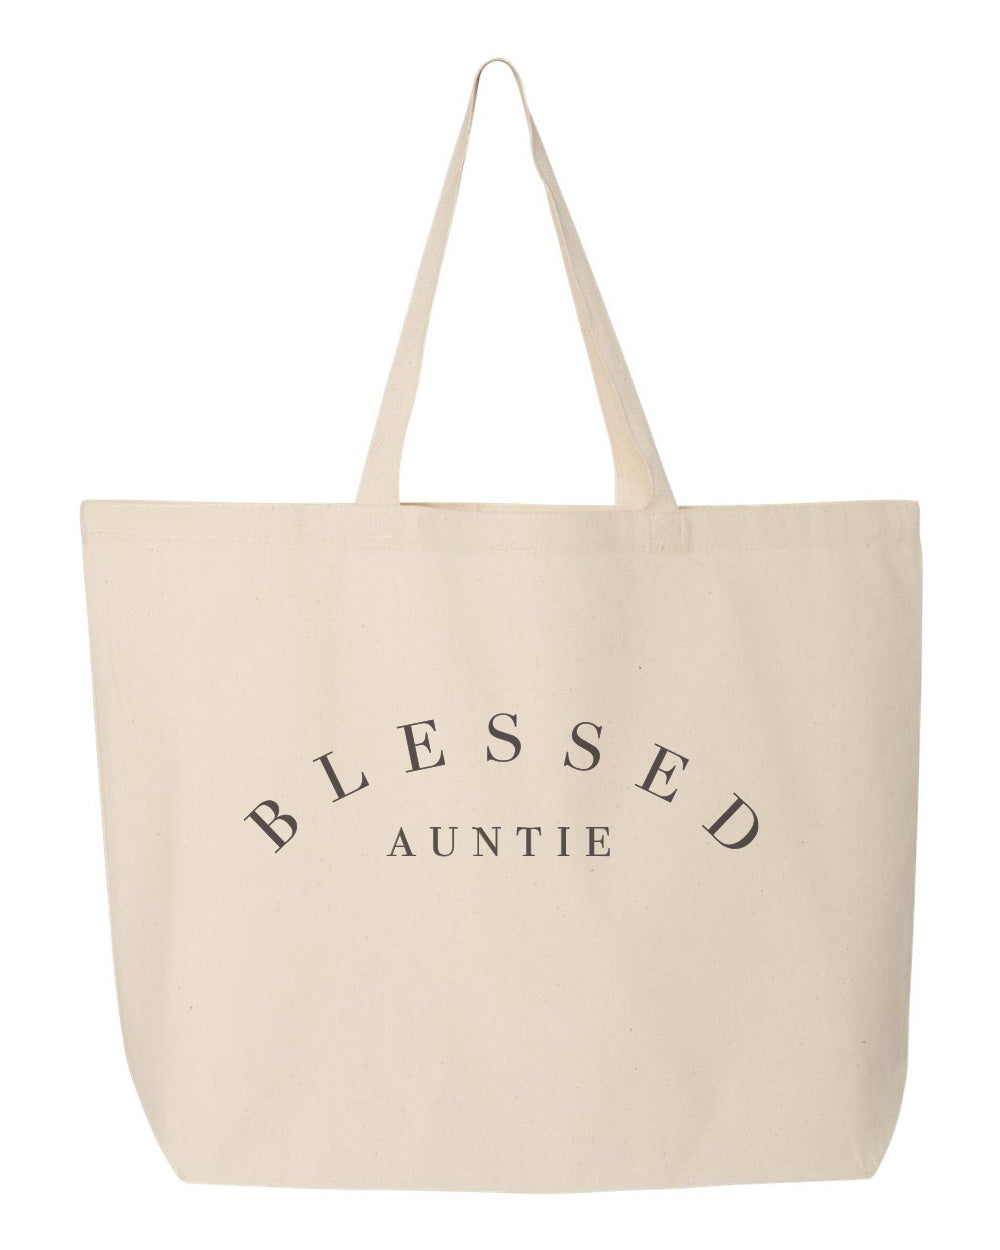 Blessed Auntie Tote